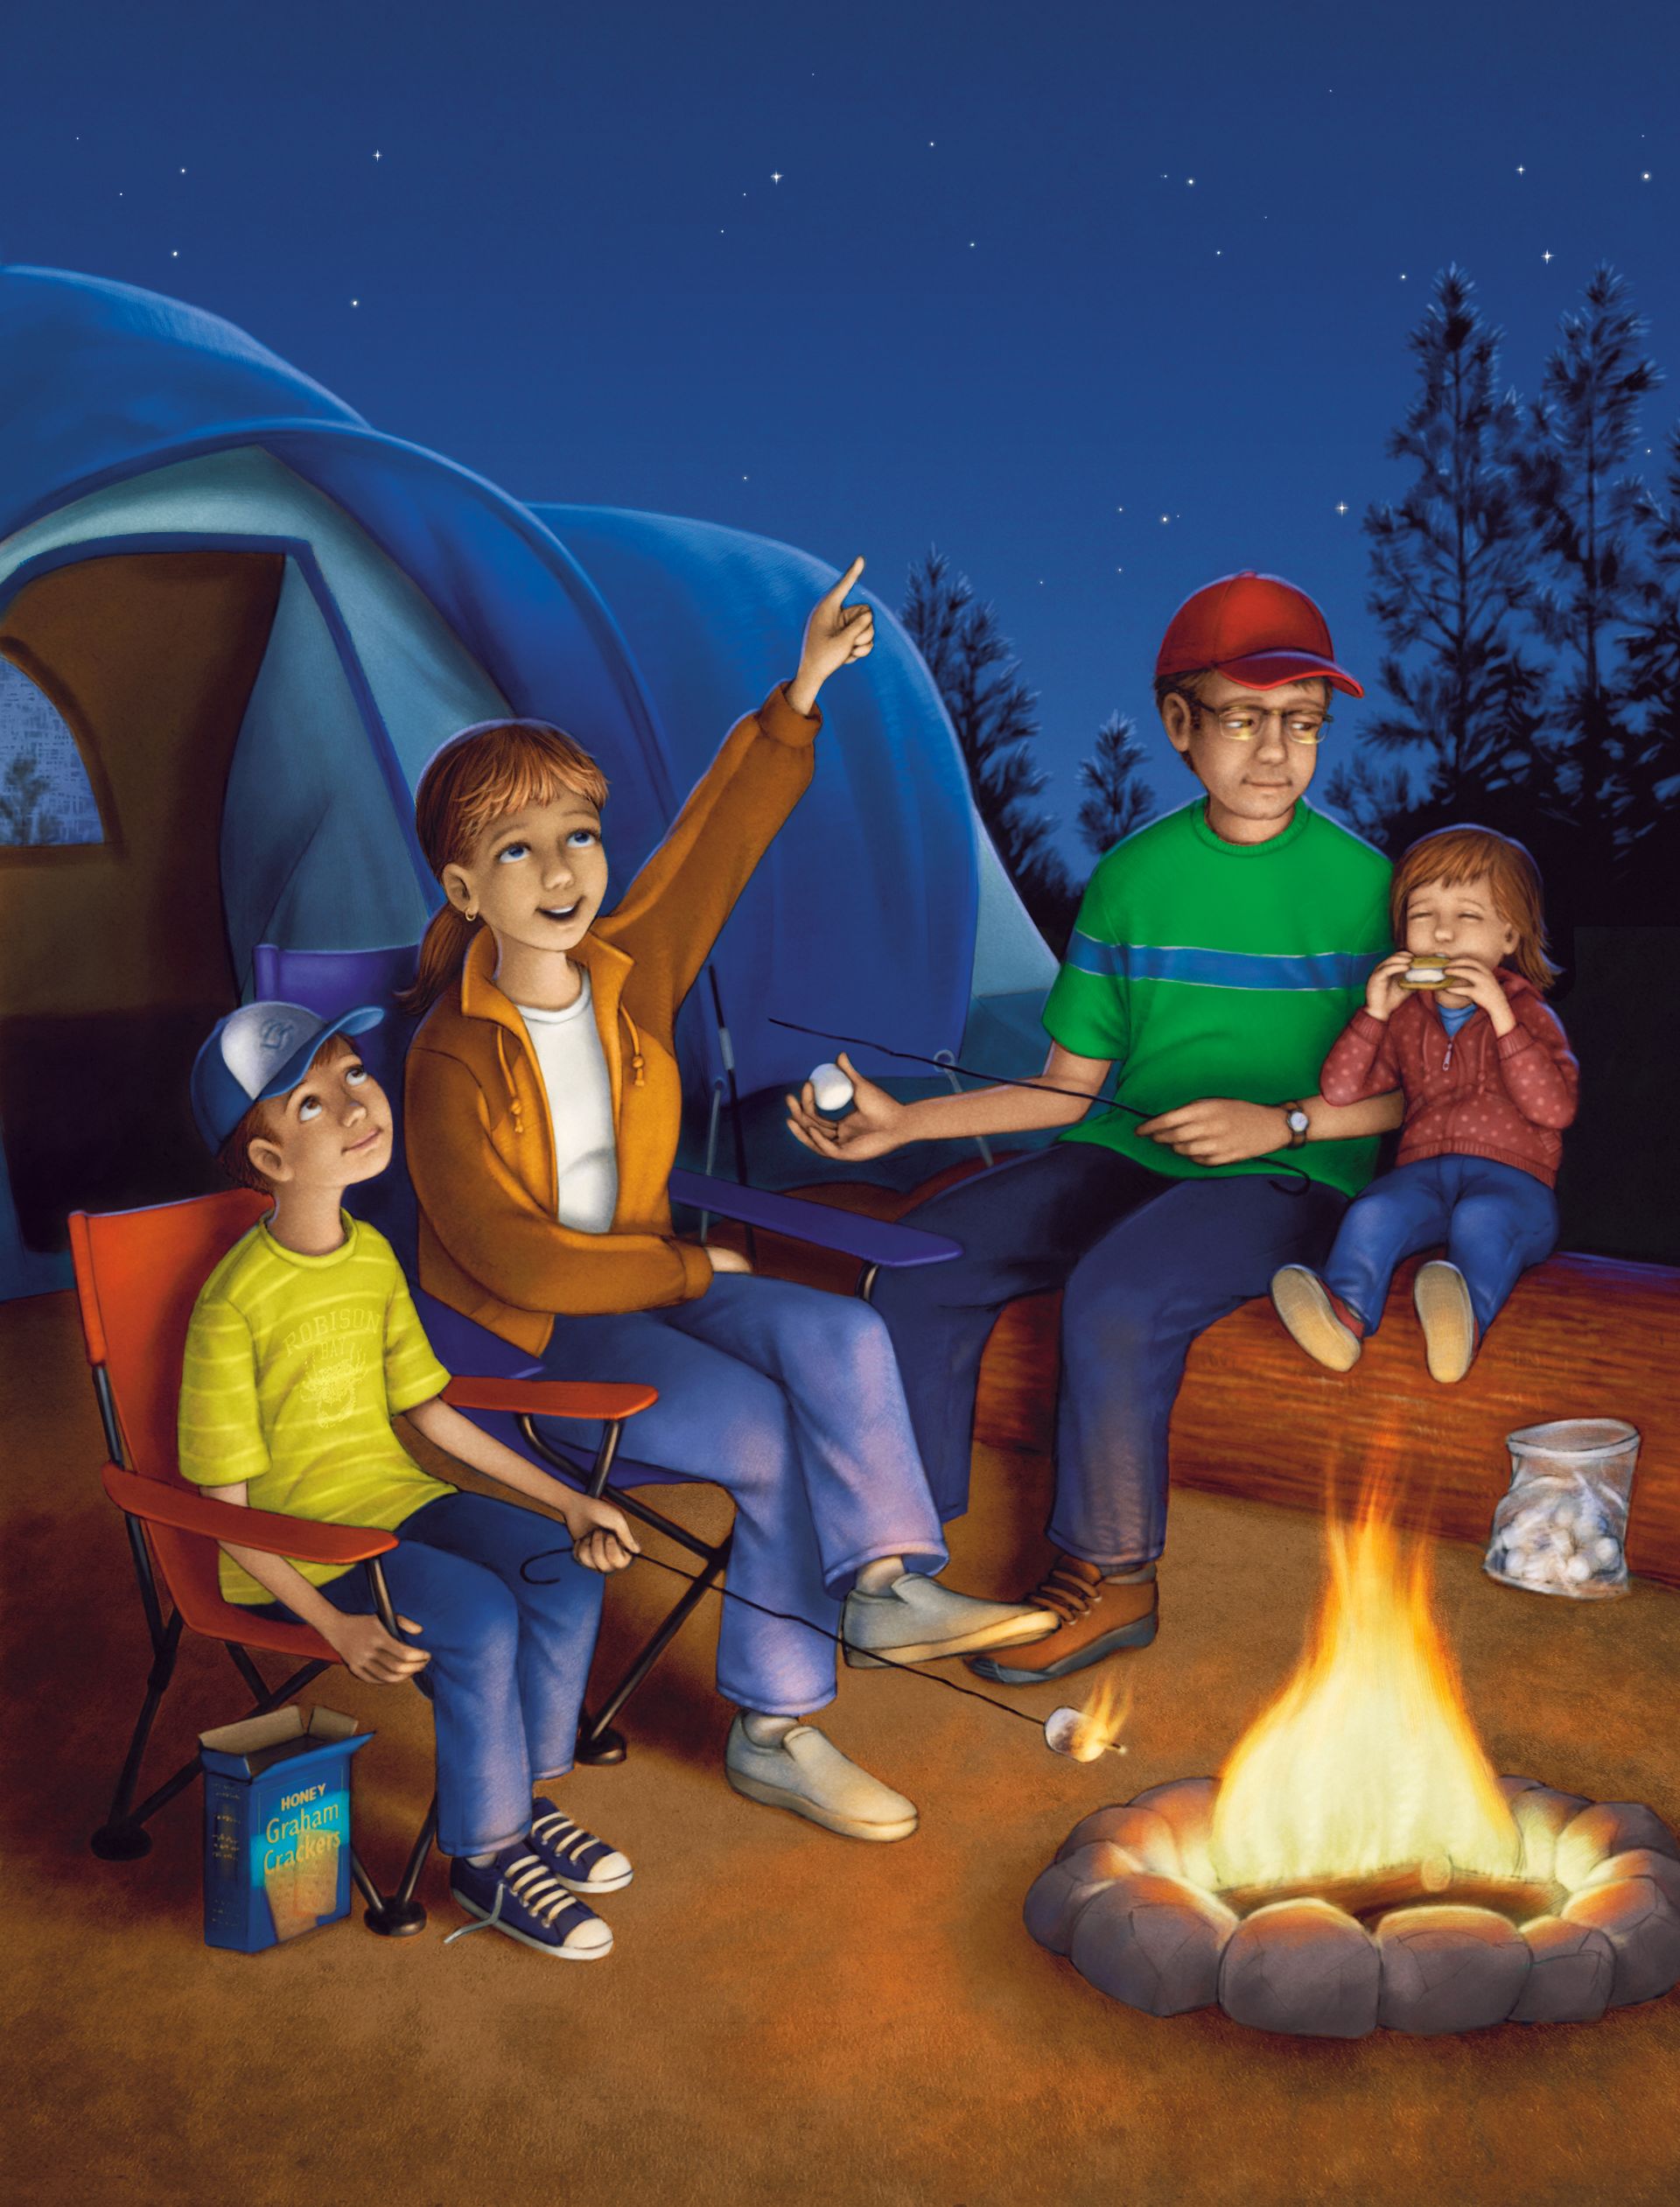 A family goes camping together.